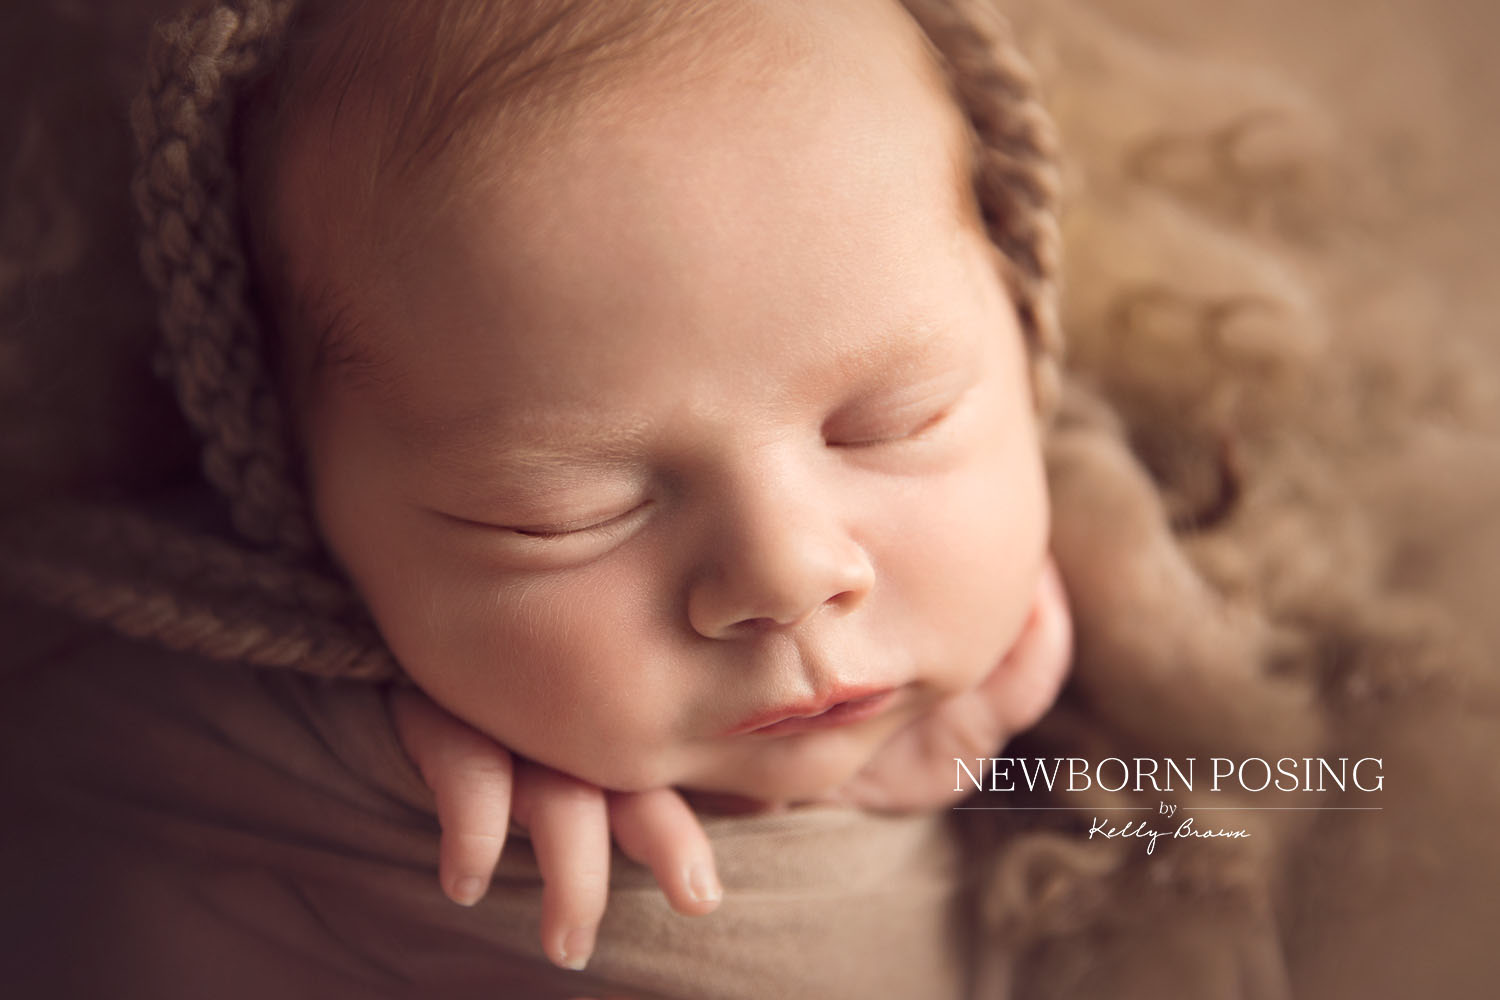 Newborn photography of baby's face close up